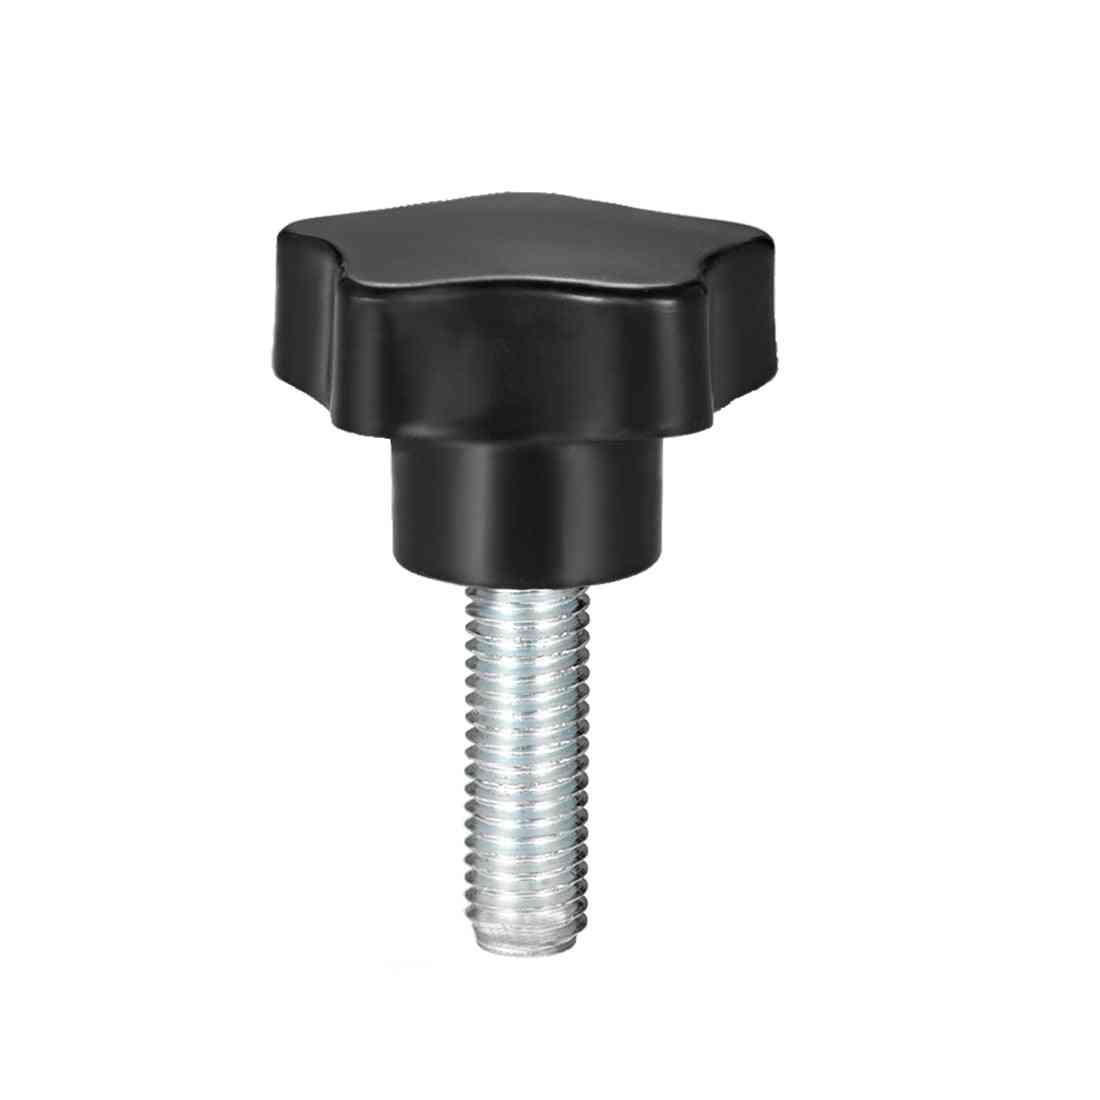 Steel Male Thread-stud Replacement, Star Knobs Grips